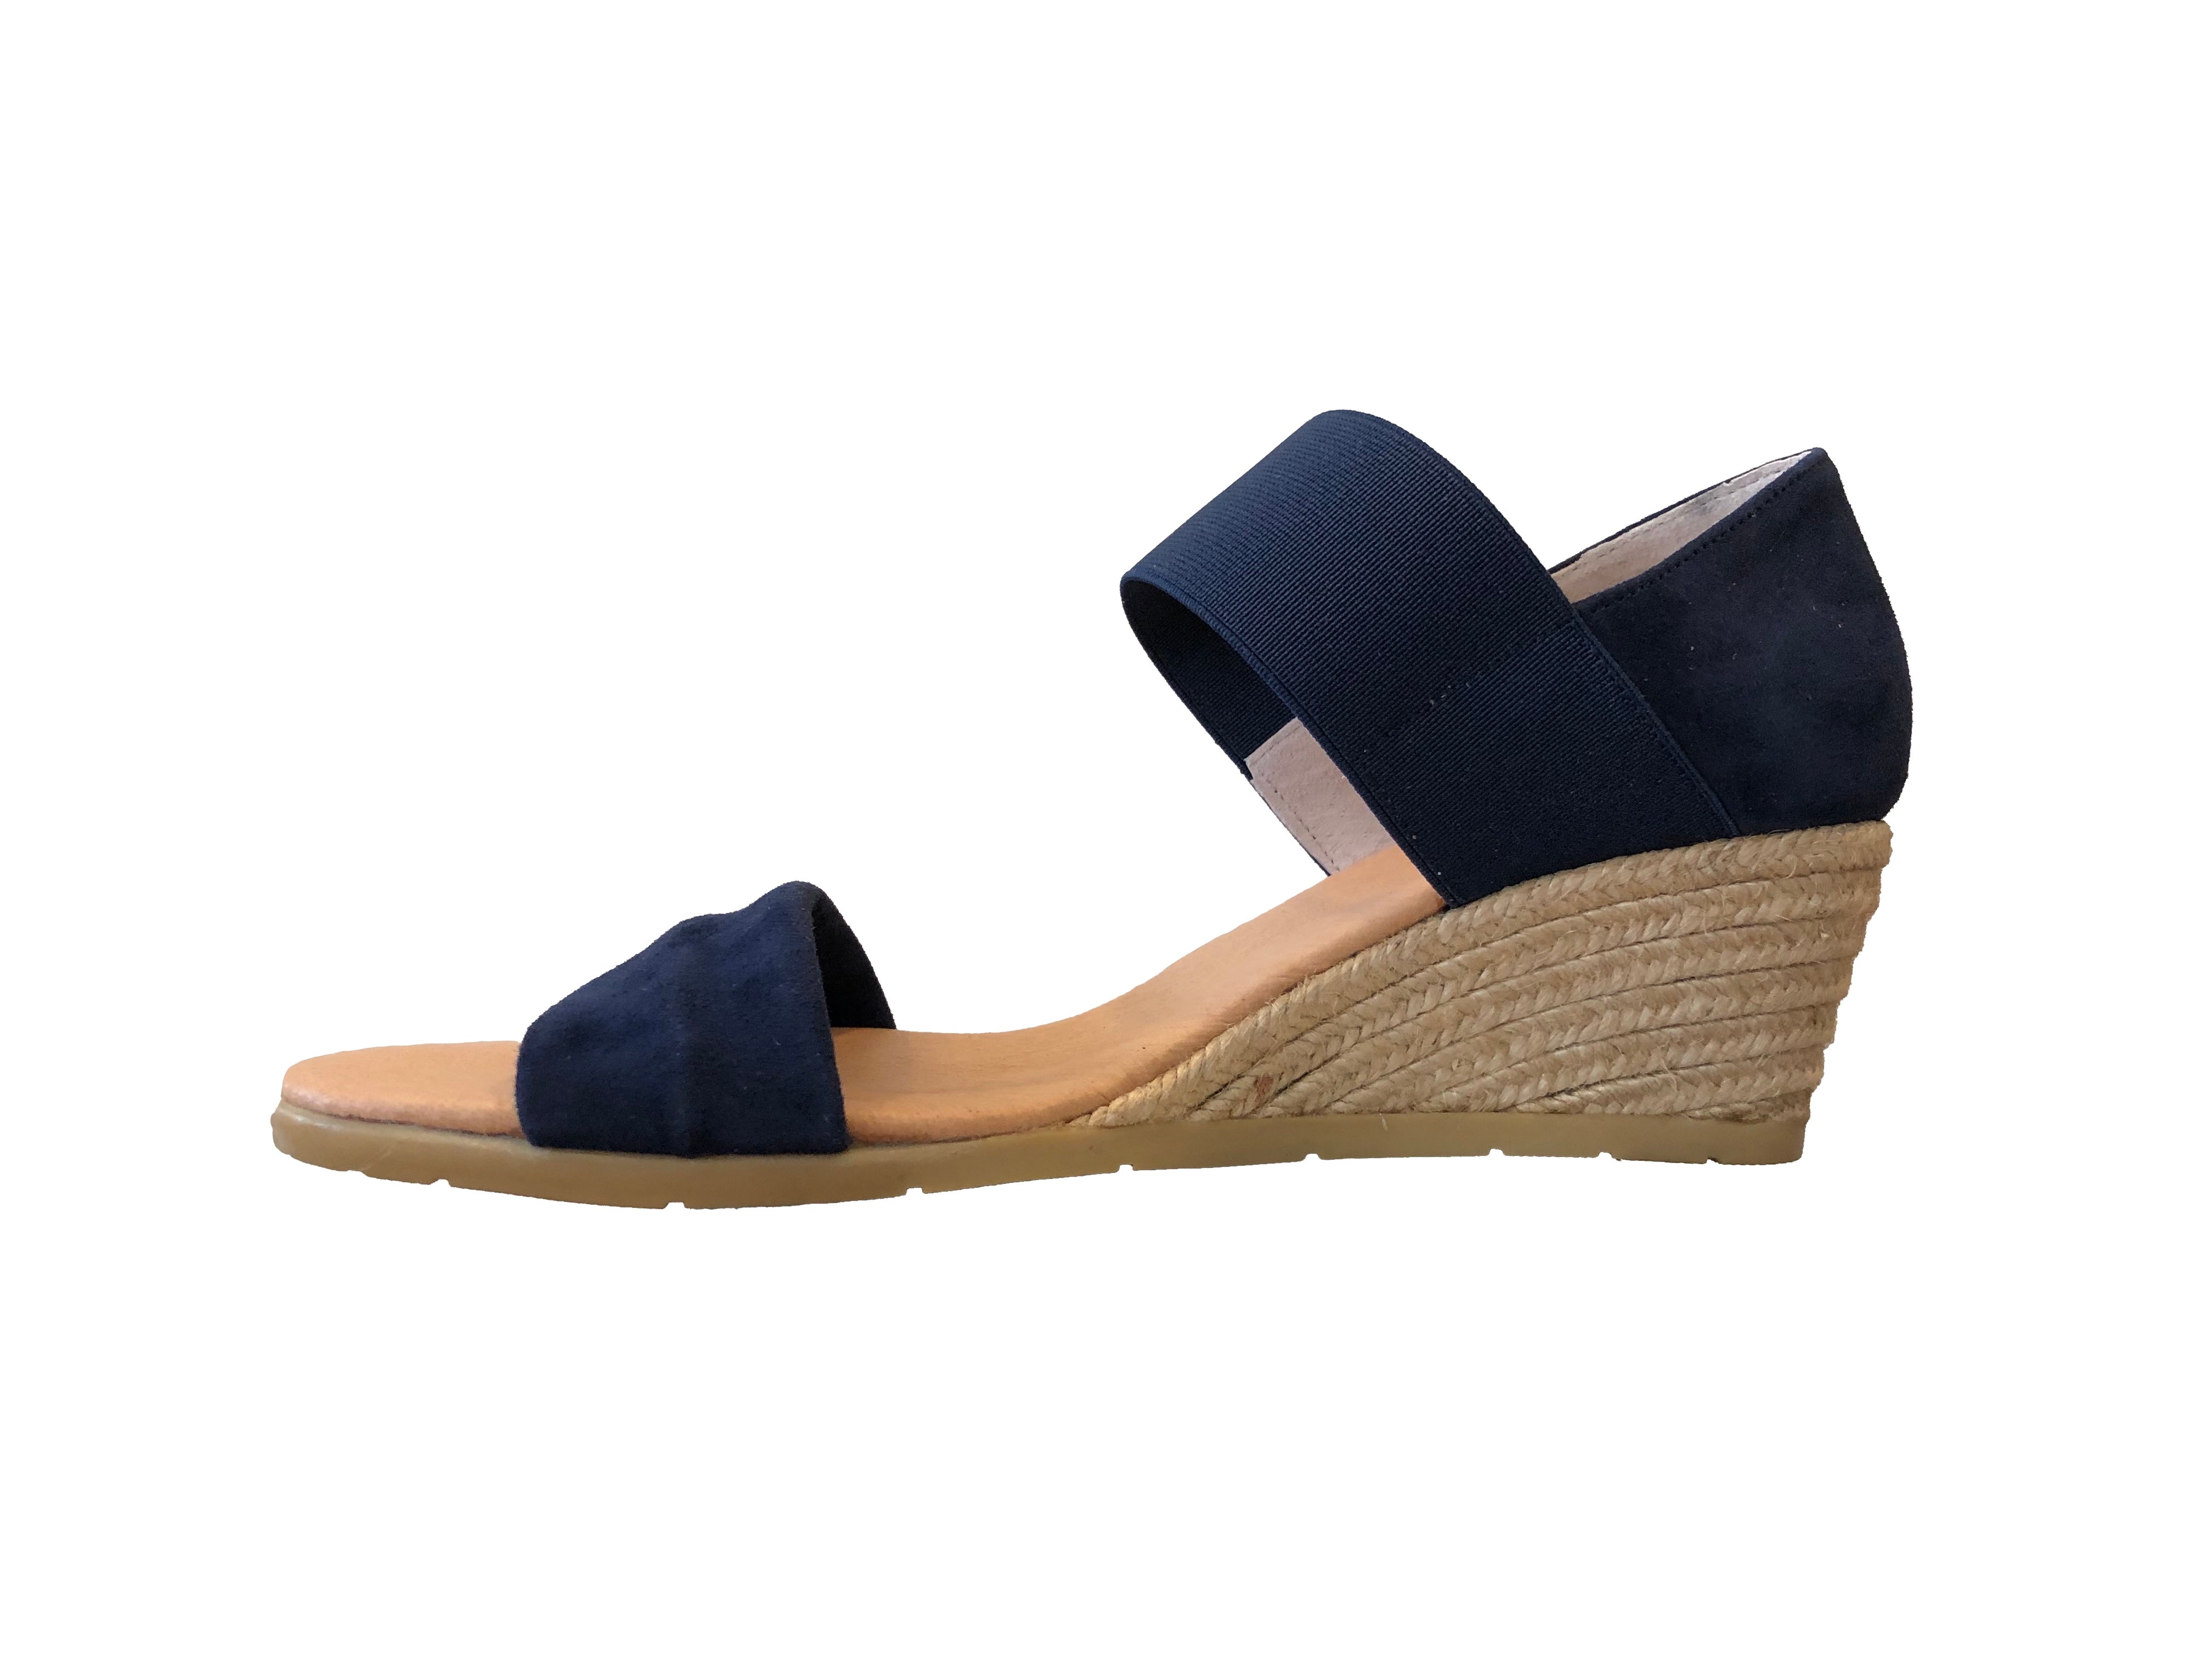 Pinaz 421/5 Navy Suede Wedge Espadrille Sandals - elevate your sole